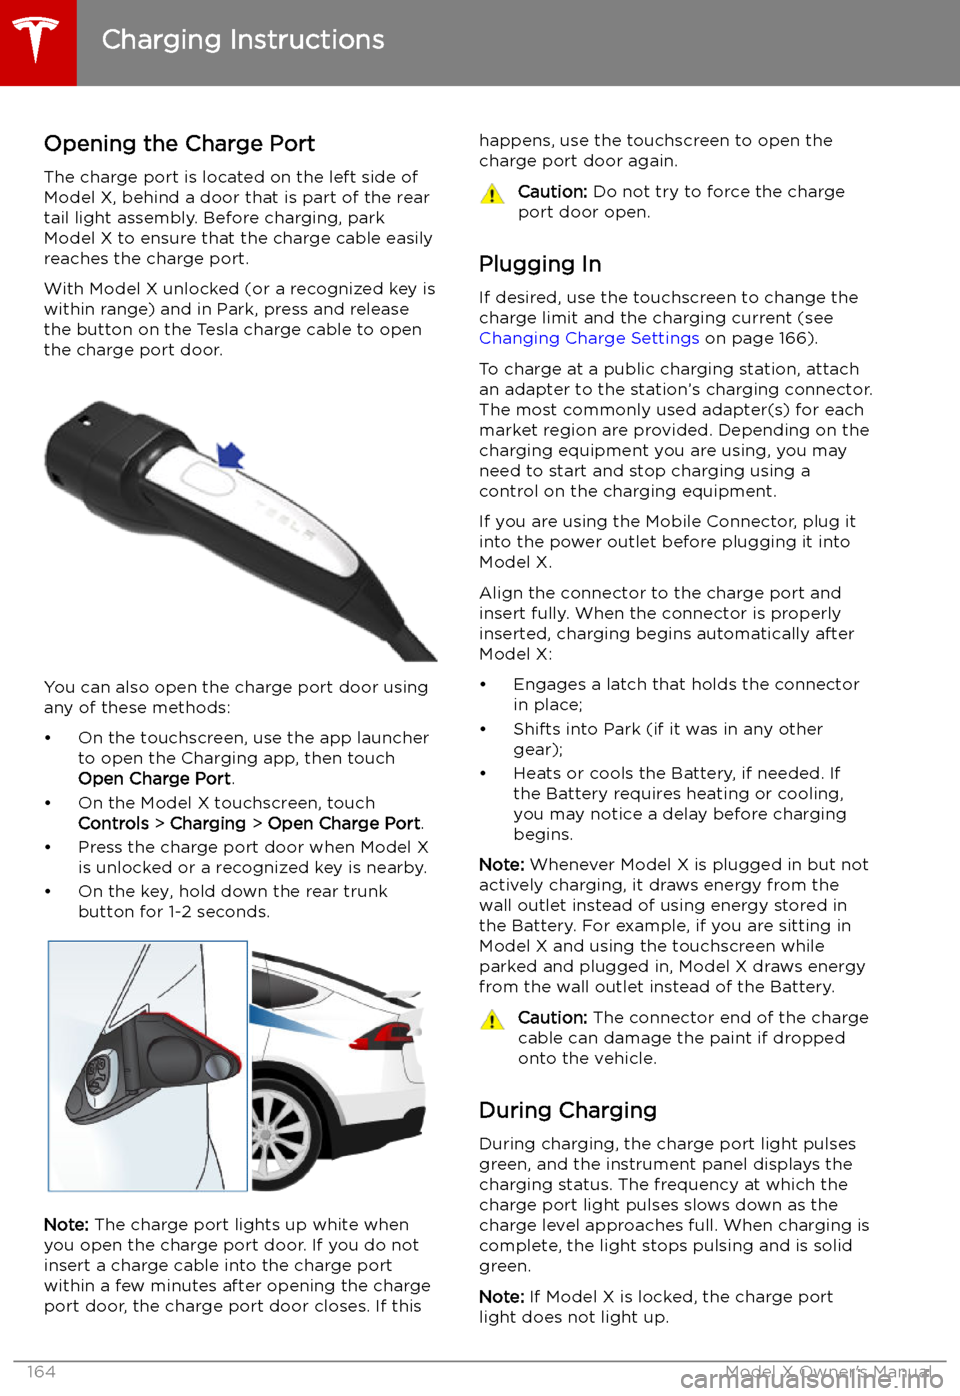 TESLA MODEL X 2019  Owners Manual  Charging Instructions
Opening the Charge Port The charge port is located on the left side of
Model X, behind a door that is part of the rear
tail light assembly. Before charging, park
Model X to ensur